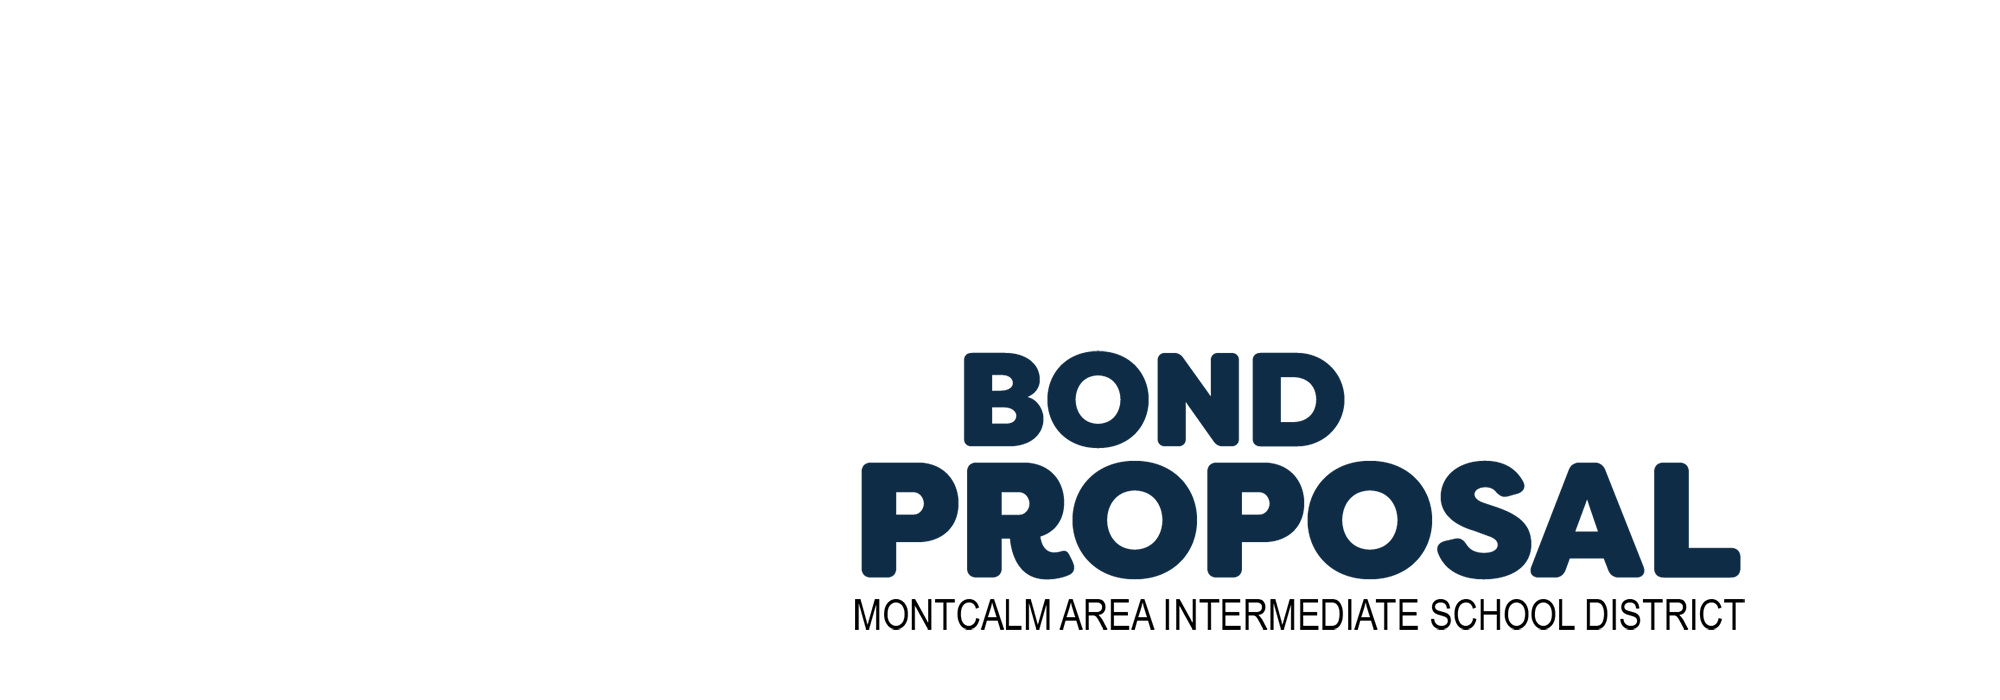 The logo for the Montcalm Area ISD Bond Proposal